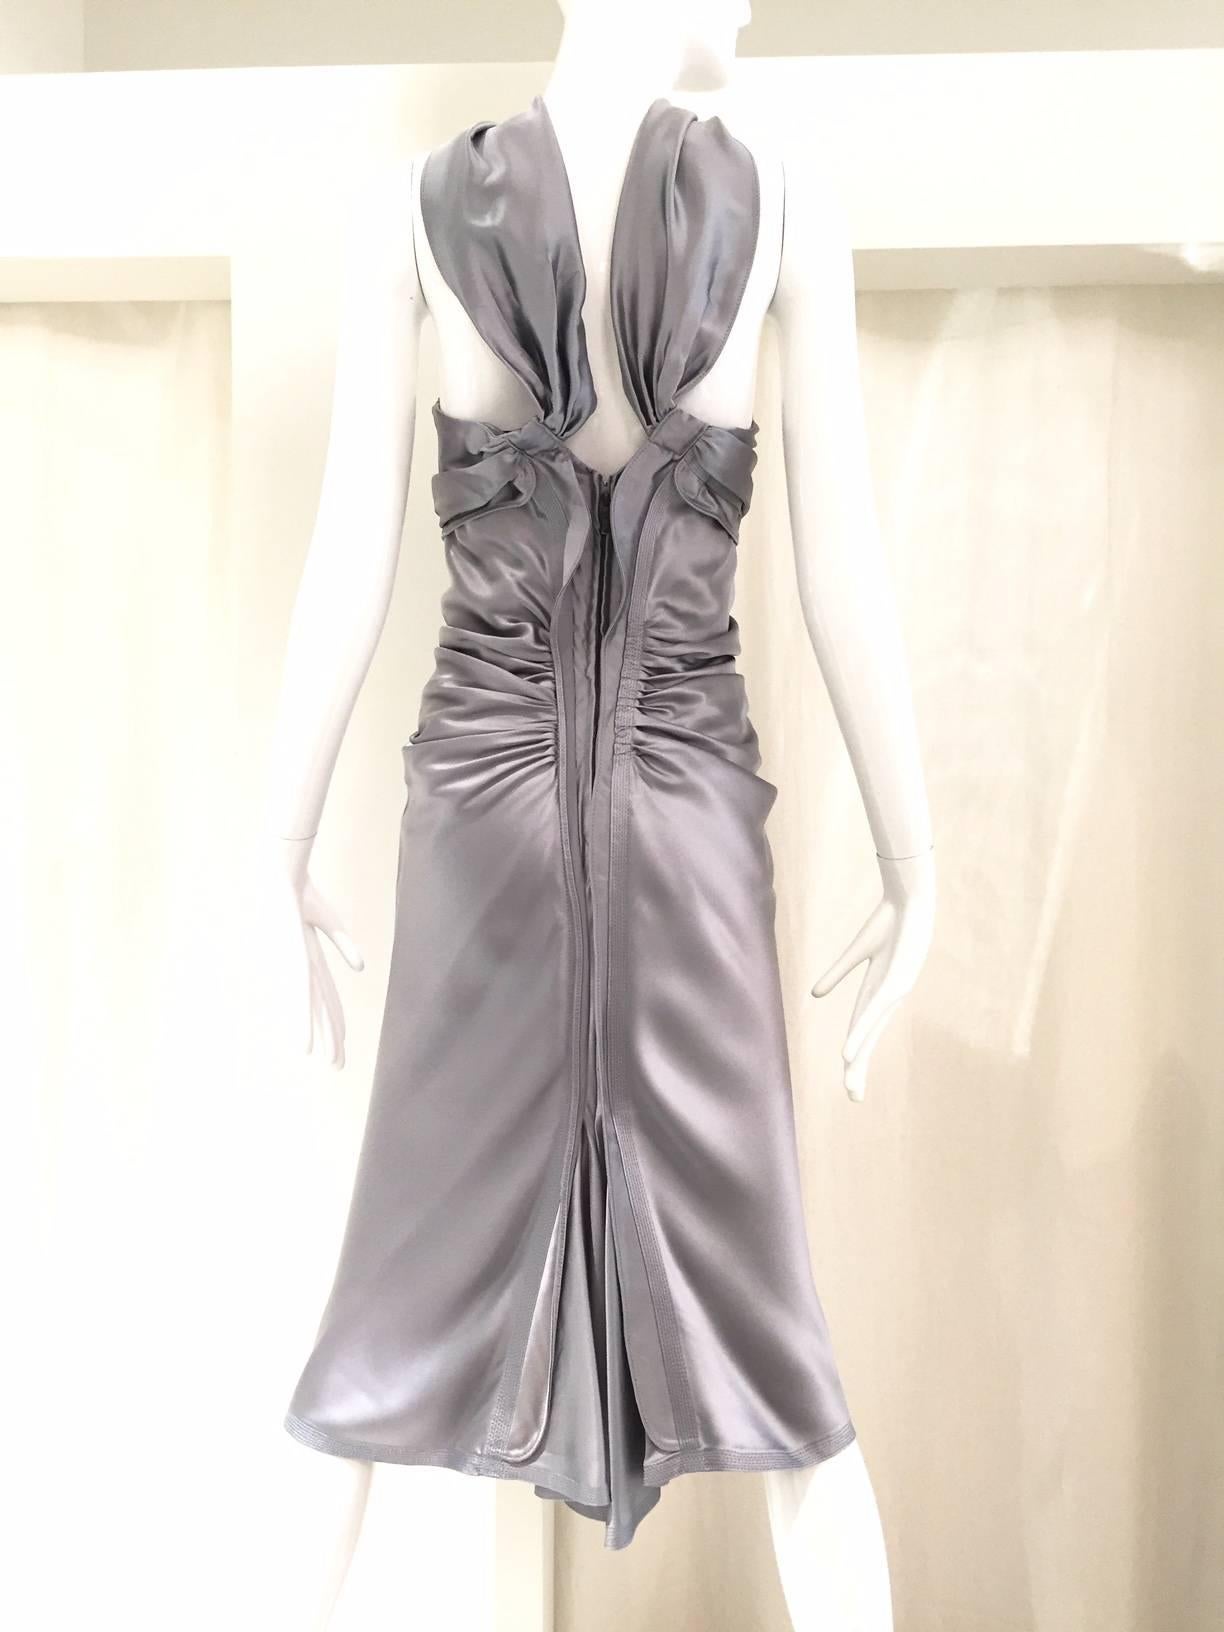 2003 Yves Saint Laurent by Tom Ford grey silk charmeuse cocktail dress.
Marked size: 36F / Fit US 2
Bust: 32